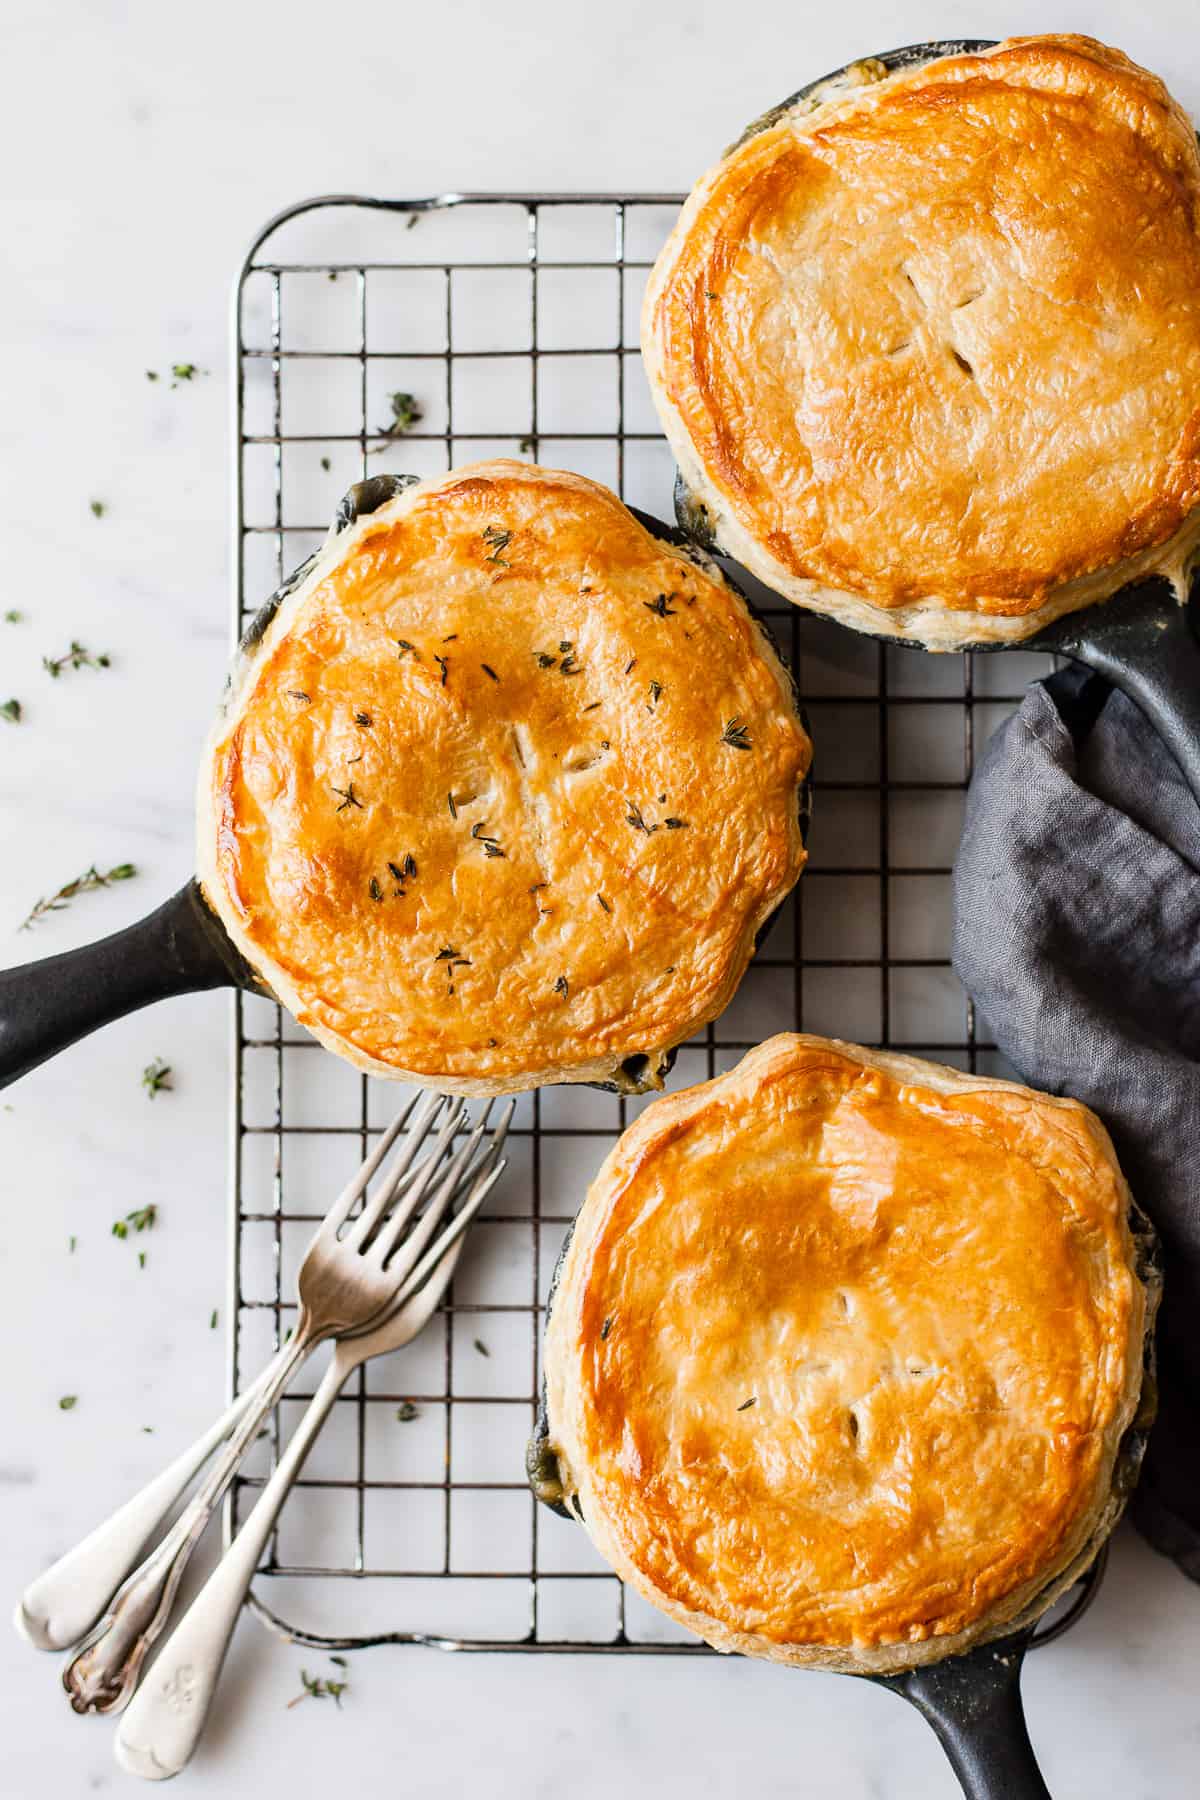 This is unquestionably the best and simplest Chicken Mushroom Pie recipe!